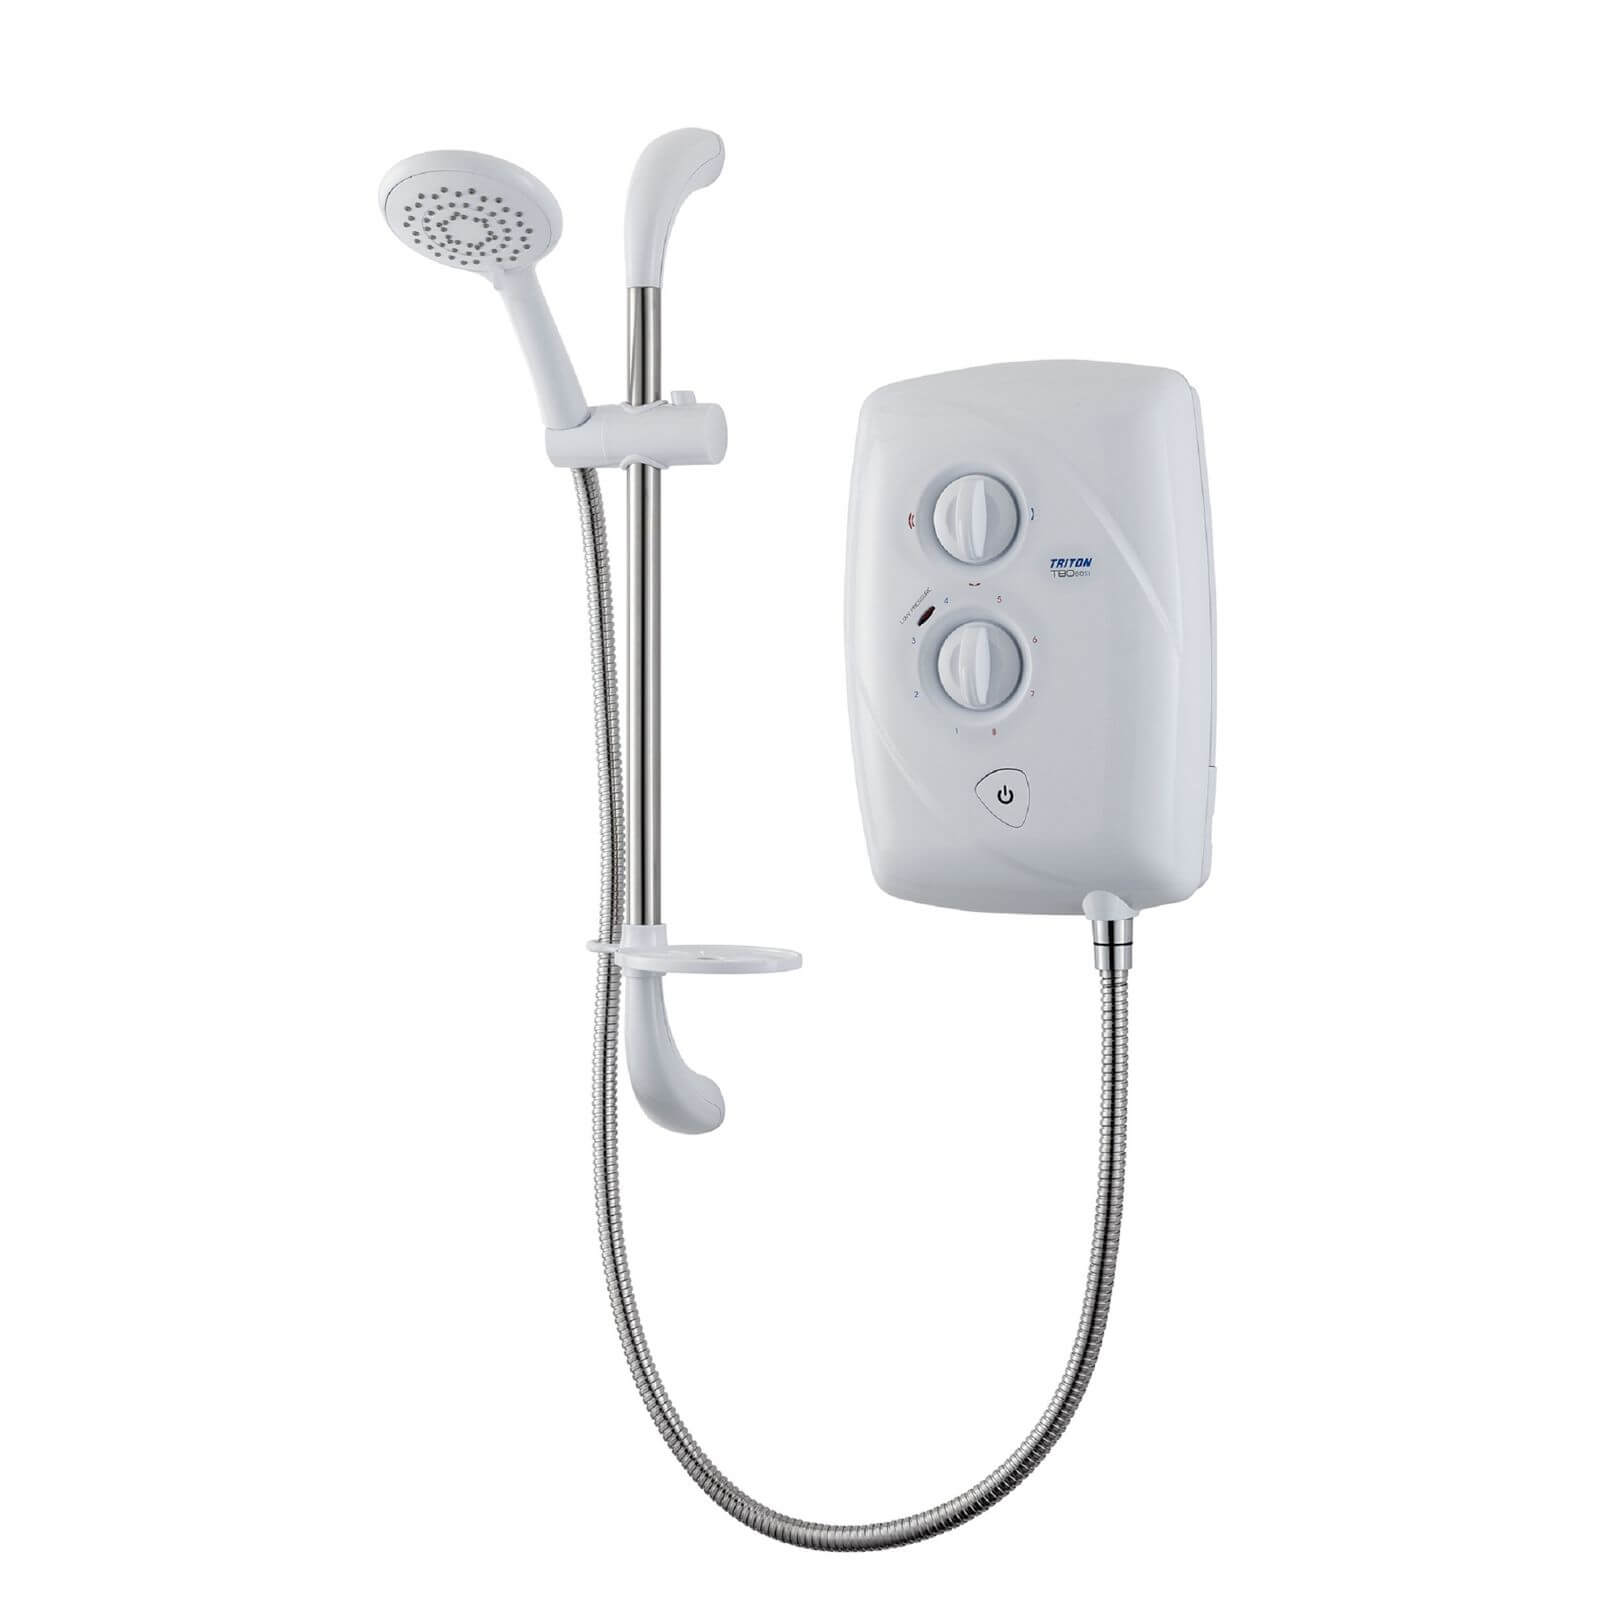 Triton T80Easi-fit 9.5kW Electric Shower - White